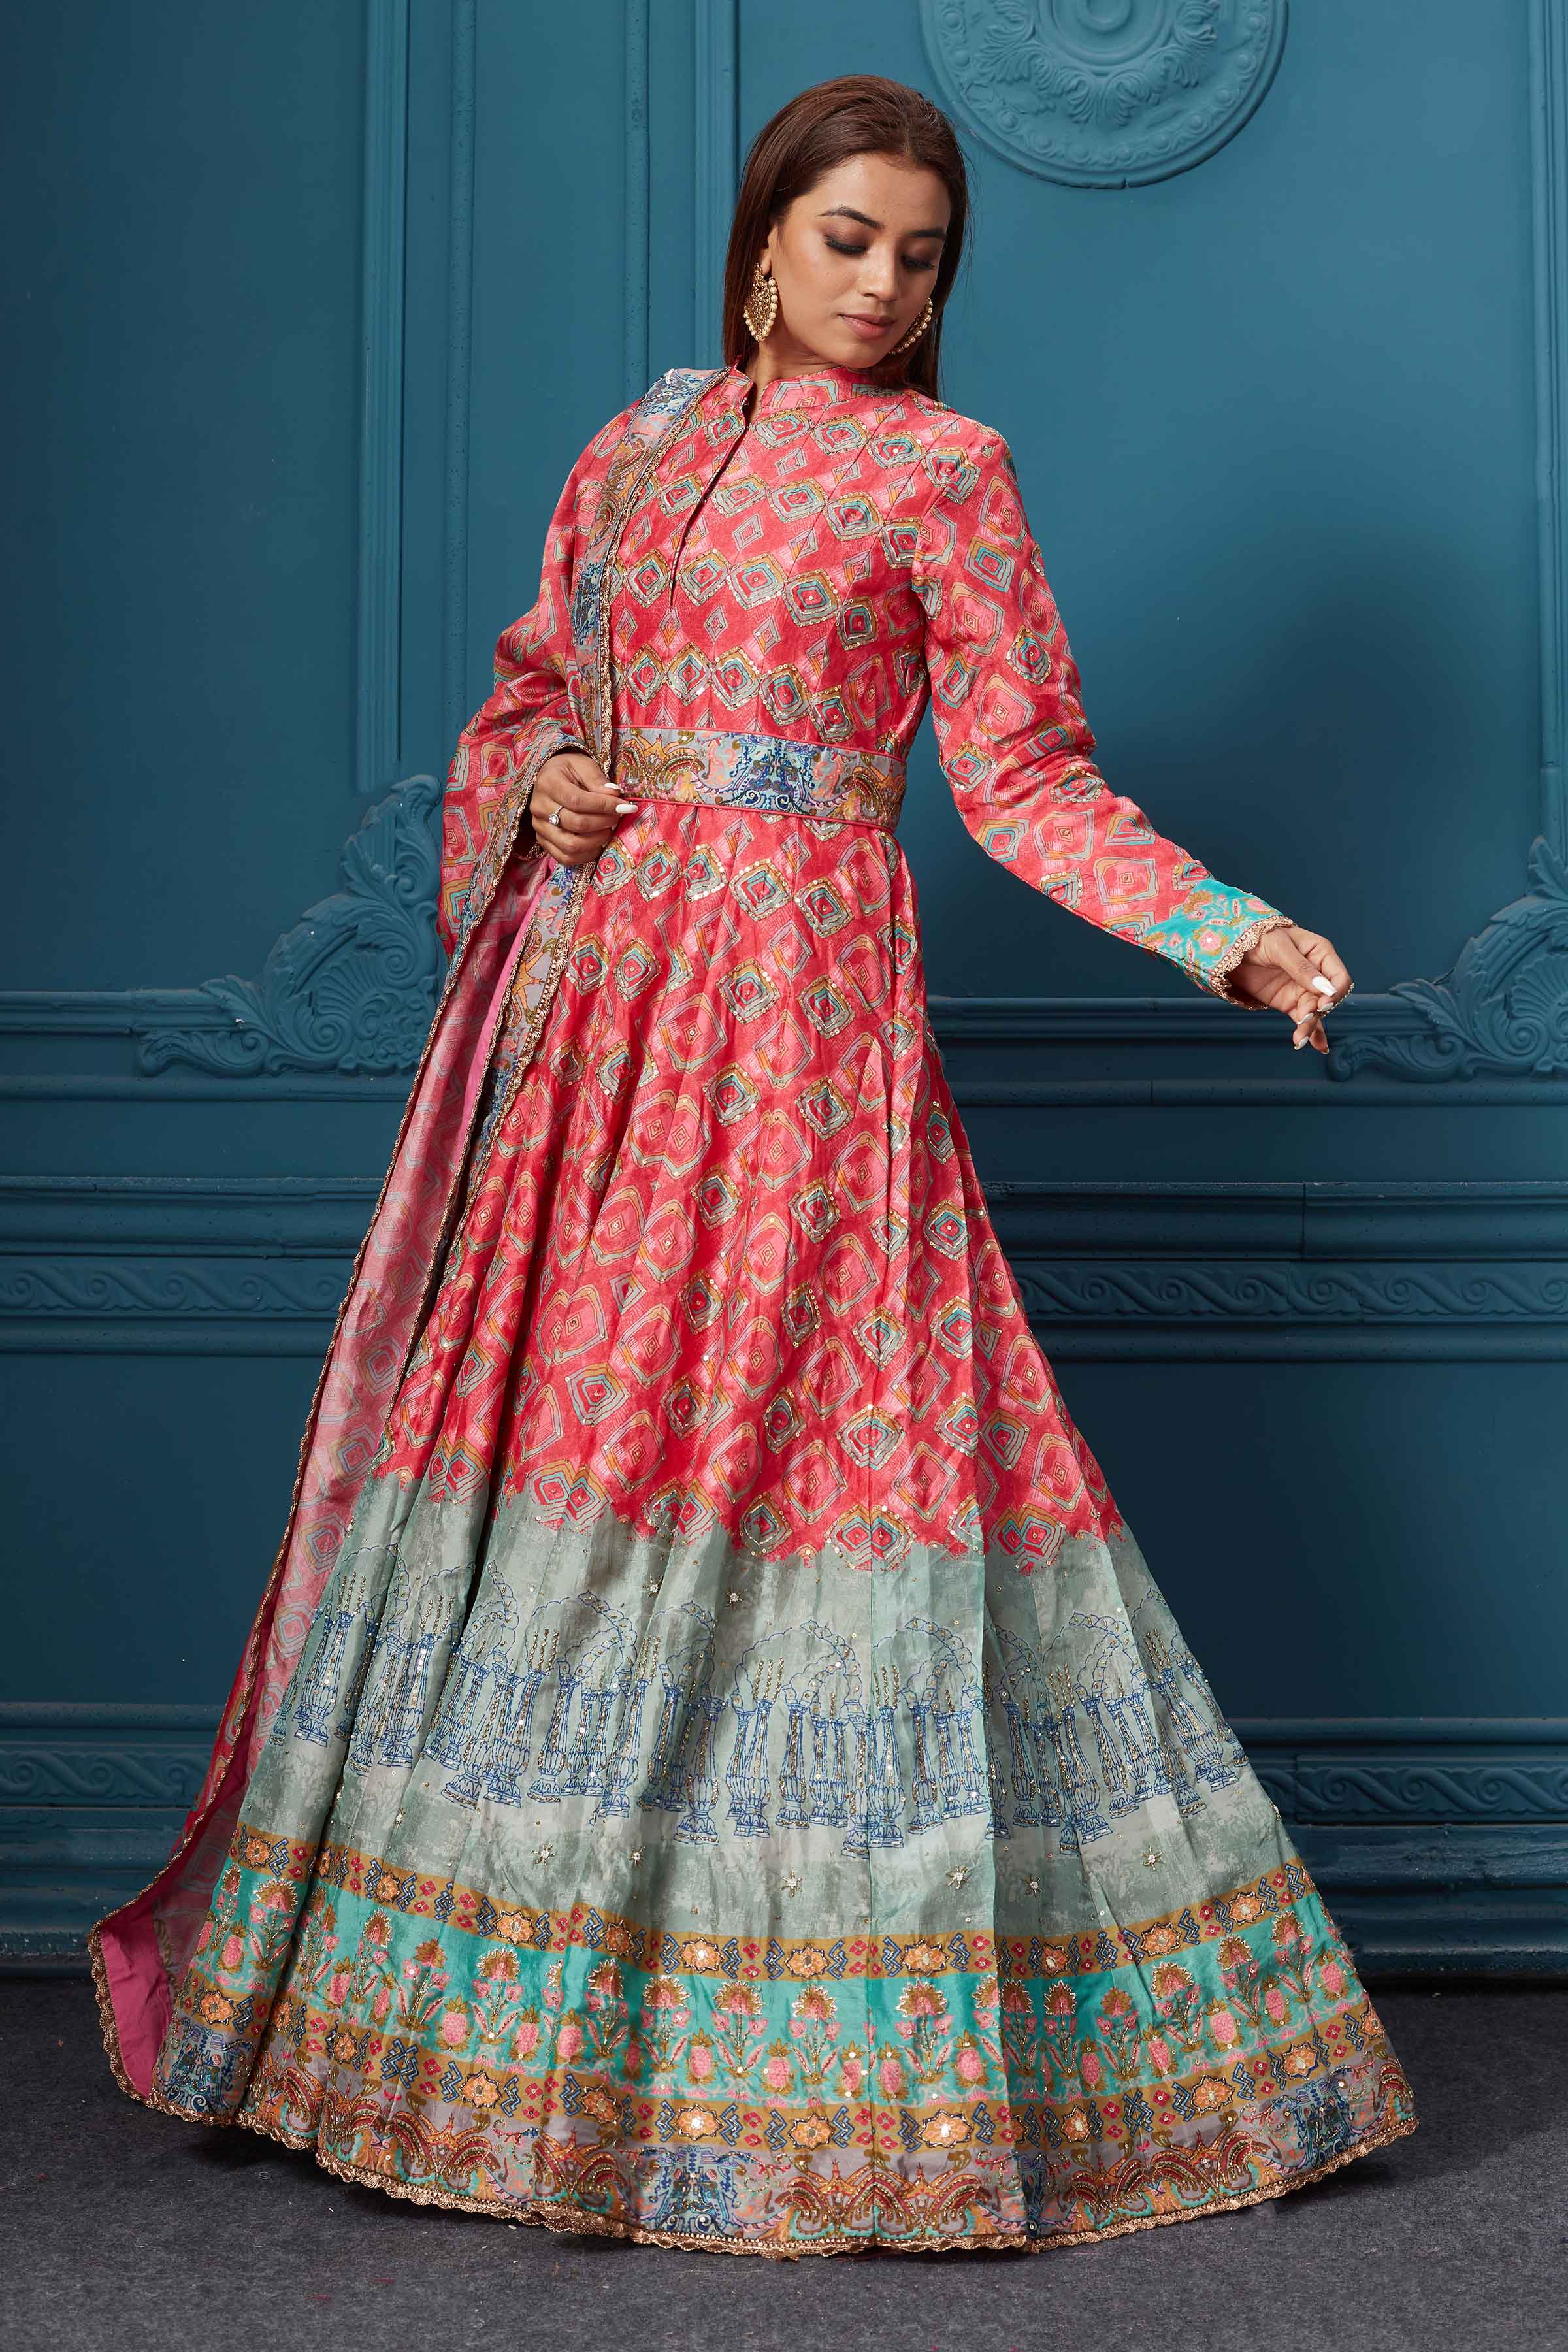 Shop a gorgeous red blue multicolored printed anarkali suit set with embroidery. Featuring a beautiful belt, collar neck, full-length sleeves, and a stylish dupatta. Shop online at Pure Elegance or visit our store in the USA.